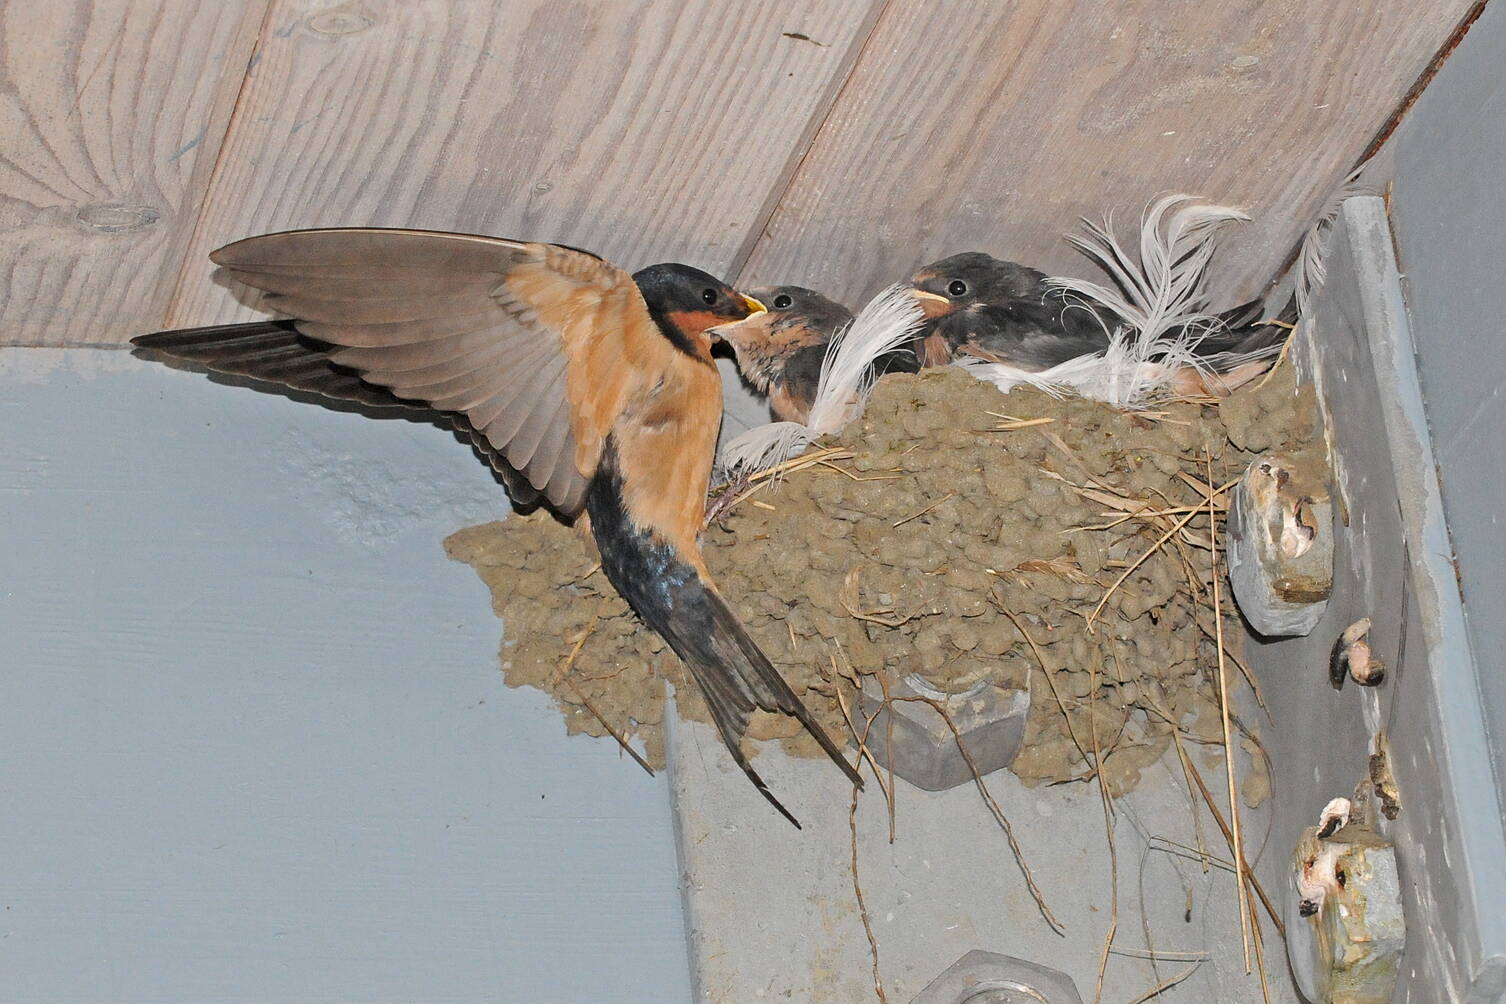 Barn swallows firmly attach their nests to walls, so they support the weight of nestlings and visiting adults.  (Photo by Bob Amrstrong)